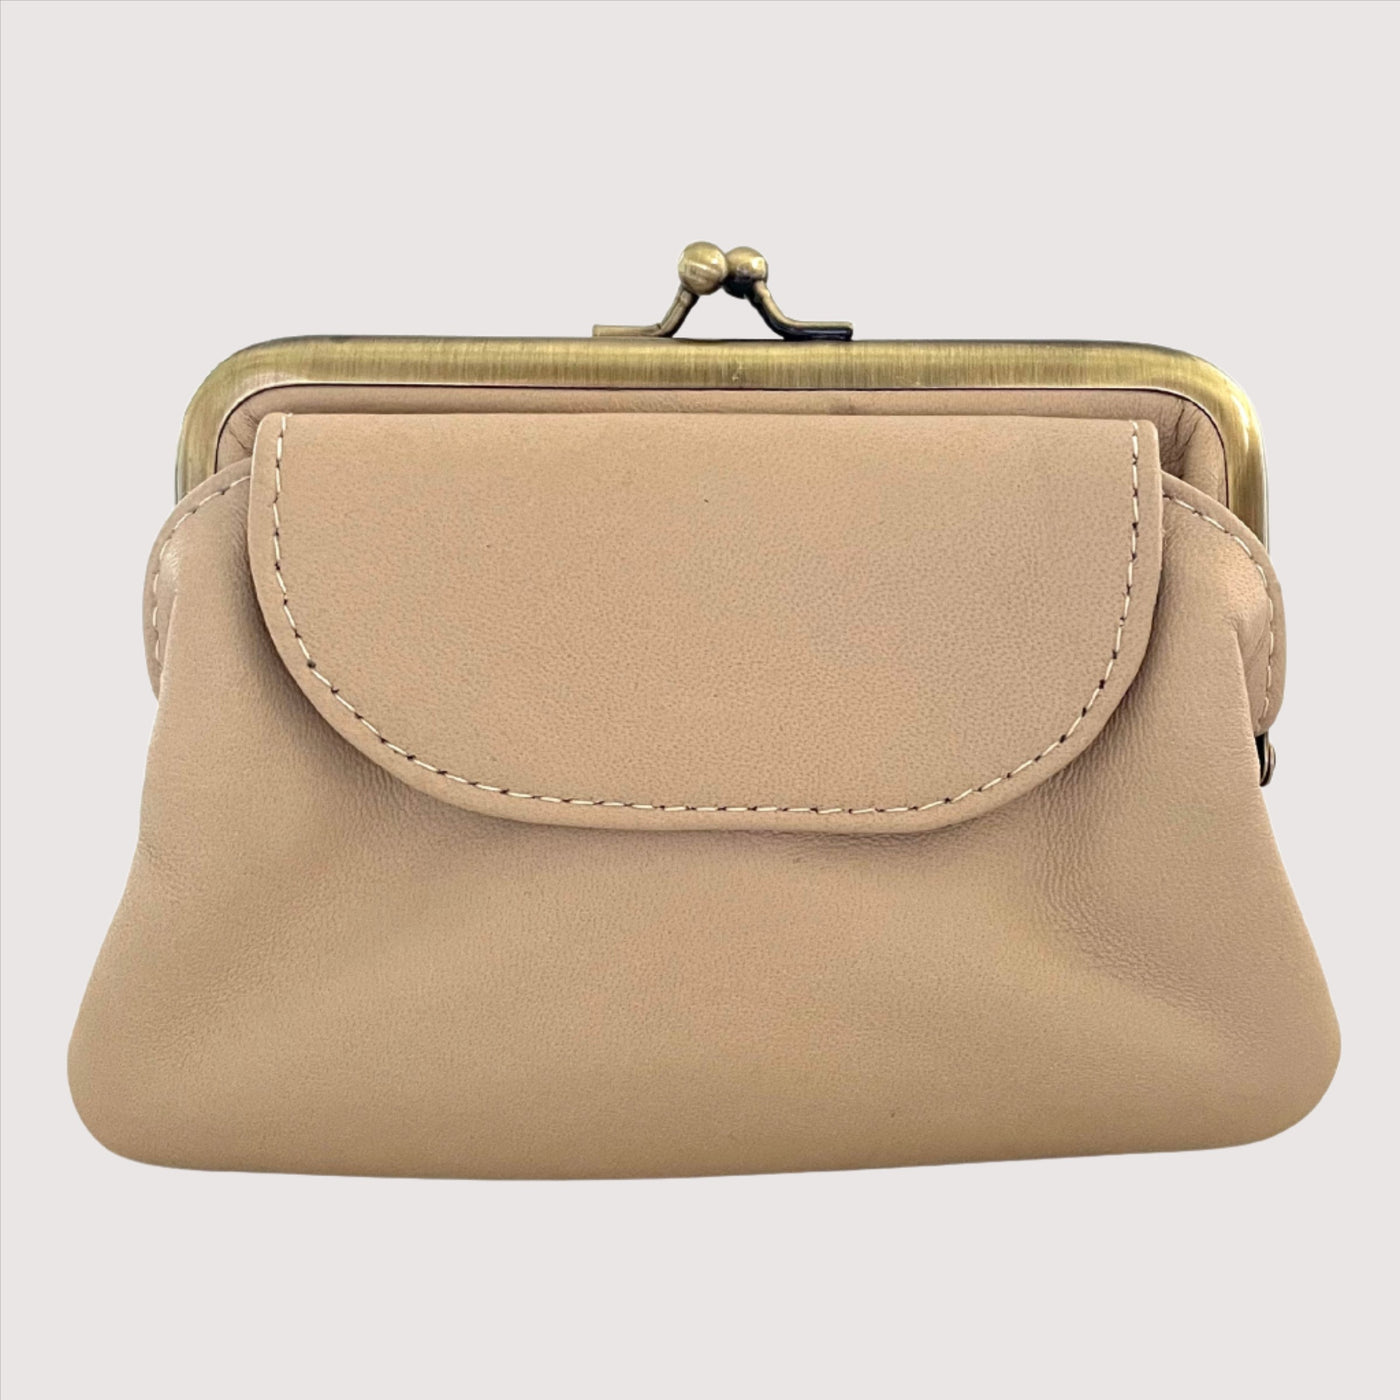 Champagne Leather Penny's Purse